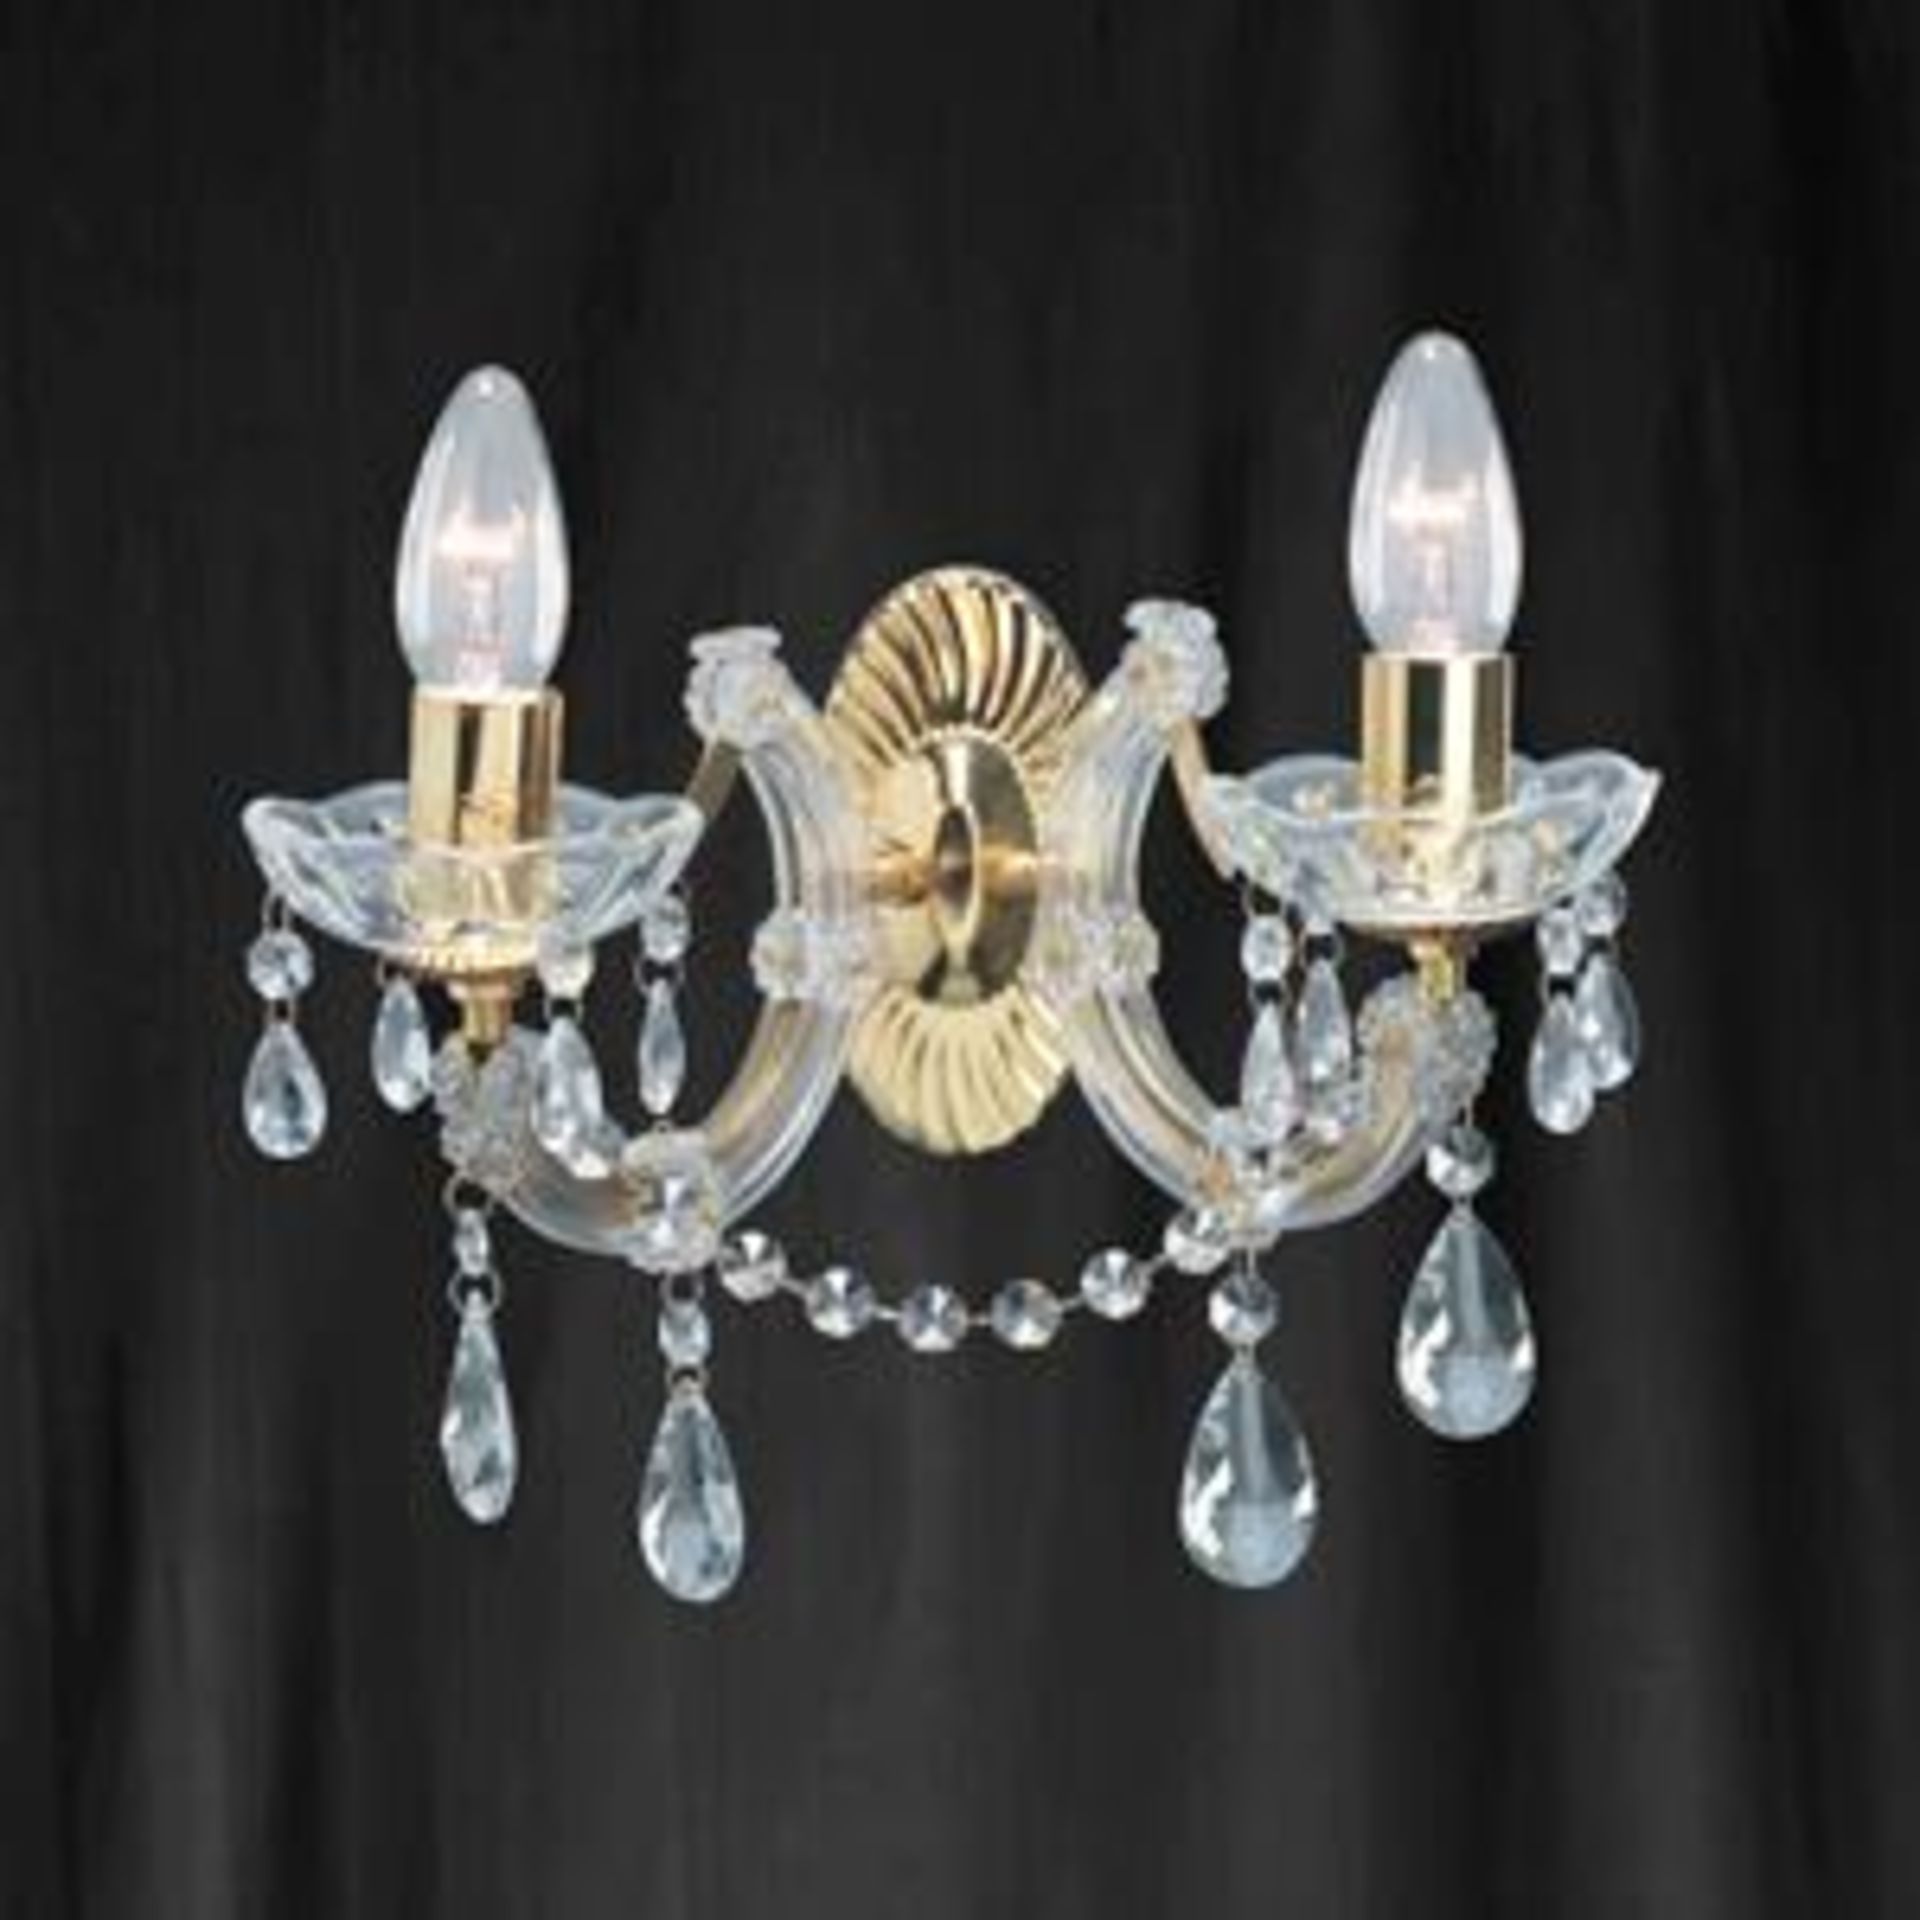 Crystal Chandelier Twin Wall Sconce The Crystal Lighting Collection Is Inspired By The Elaborate